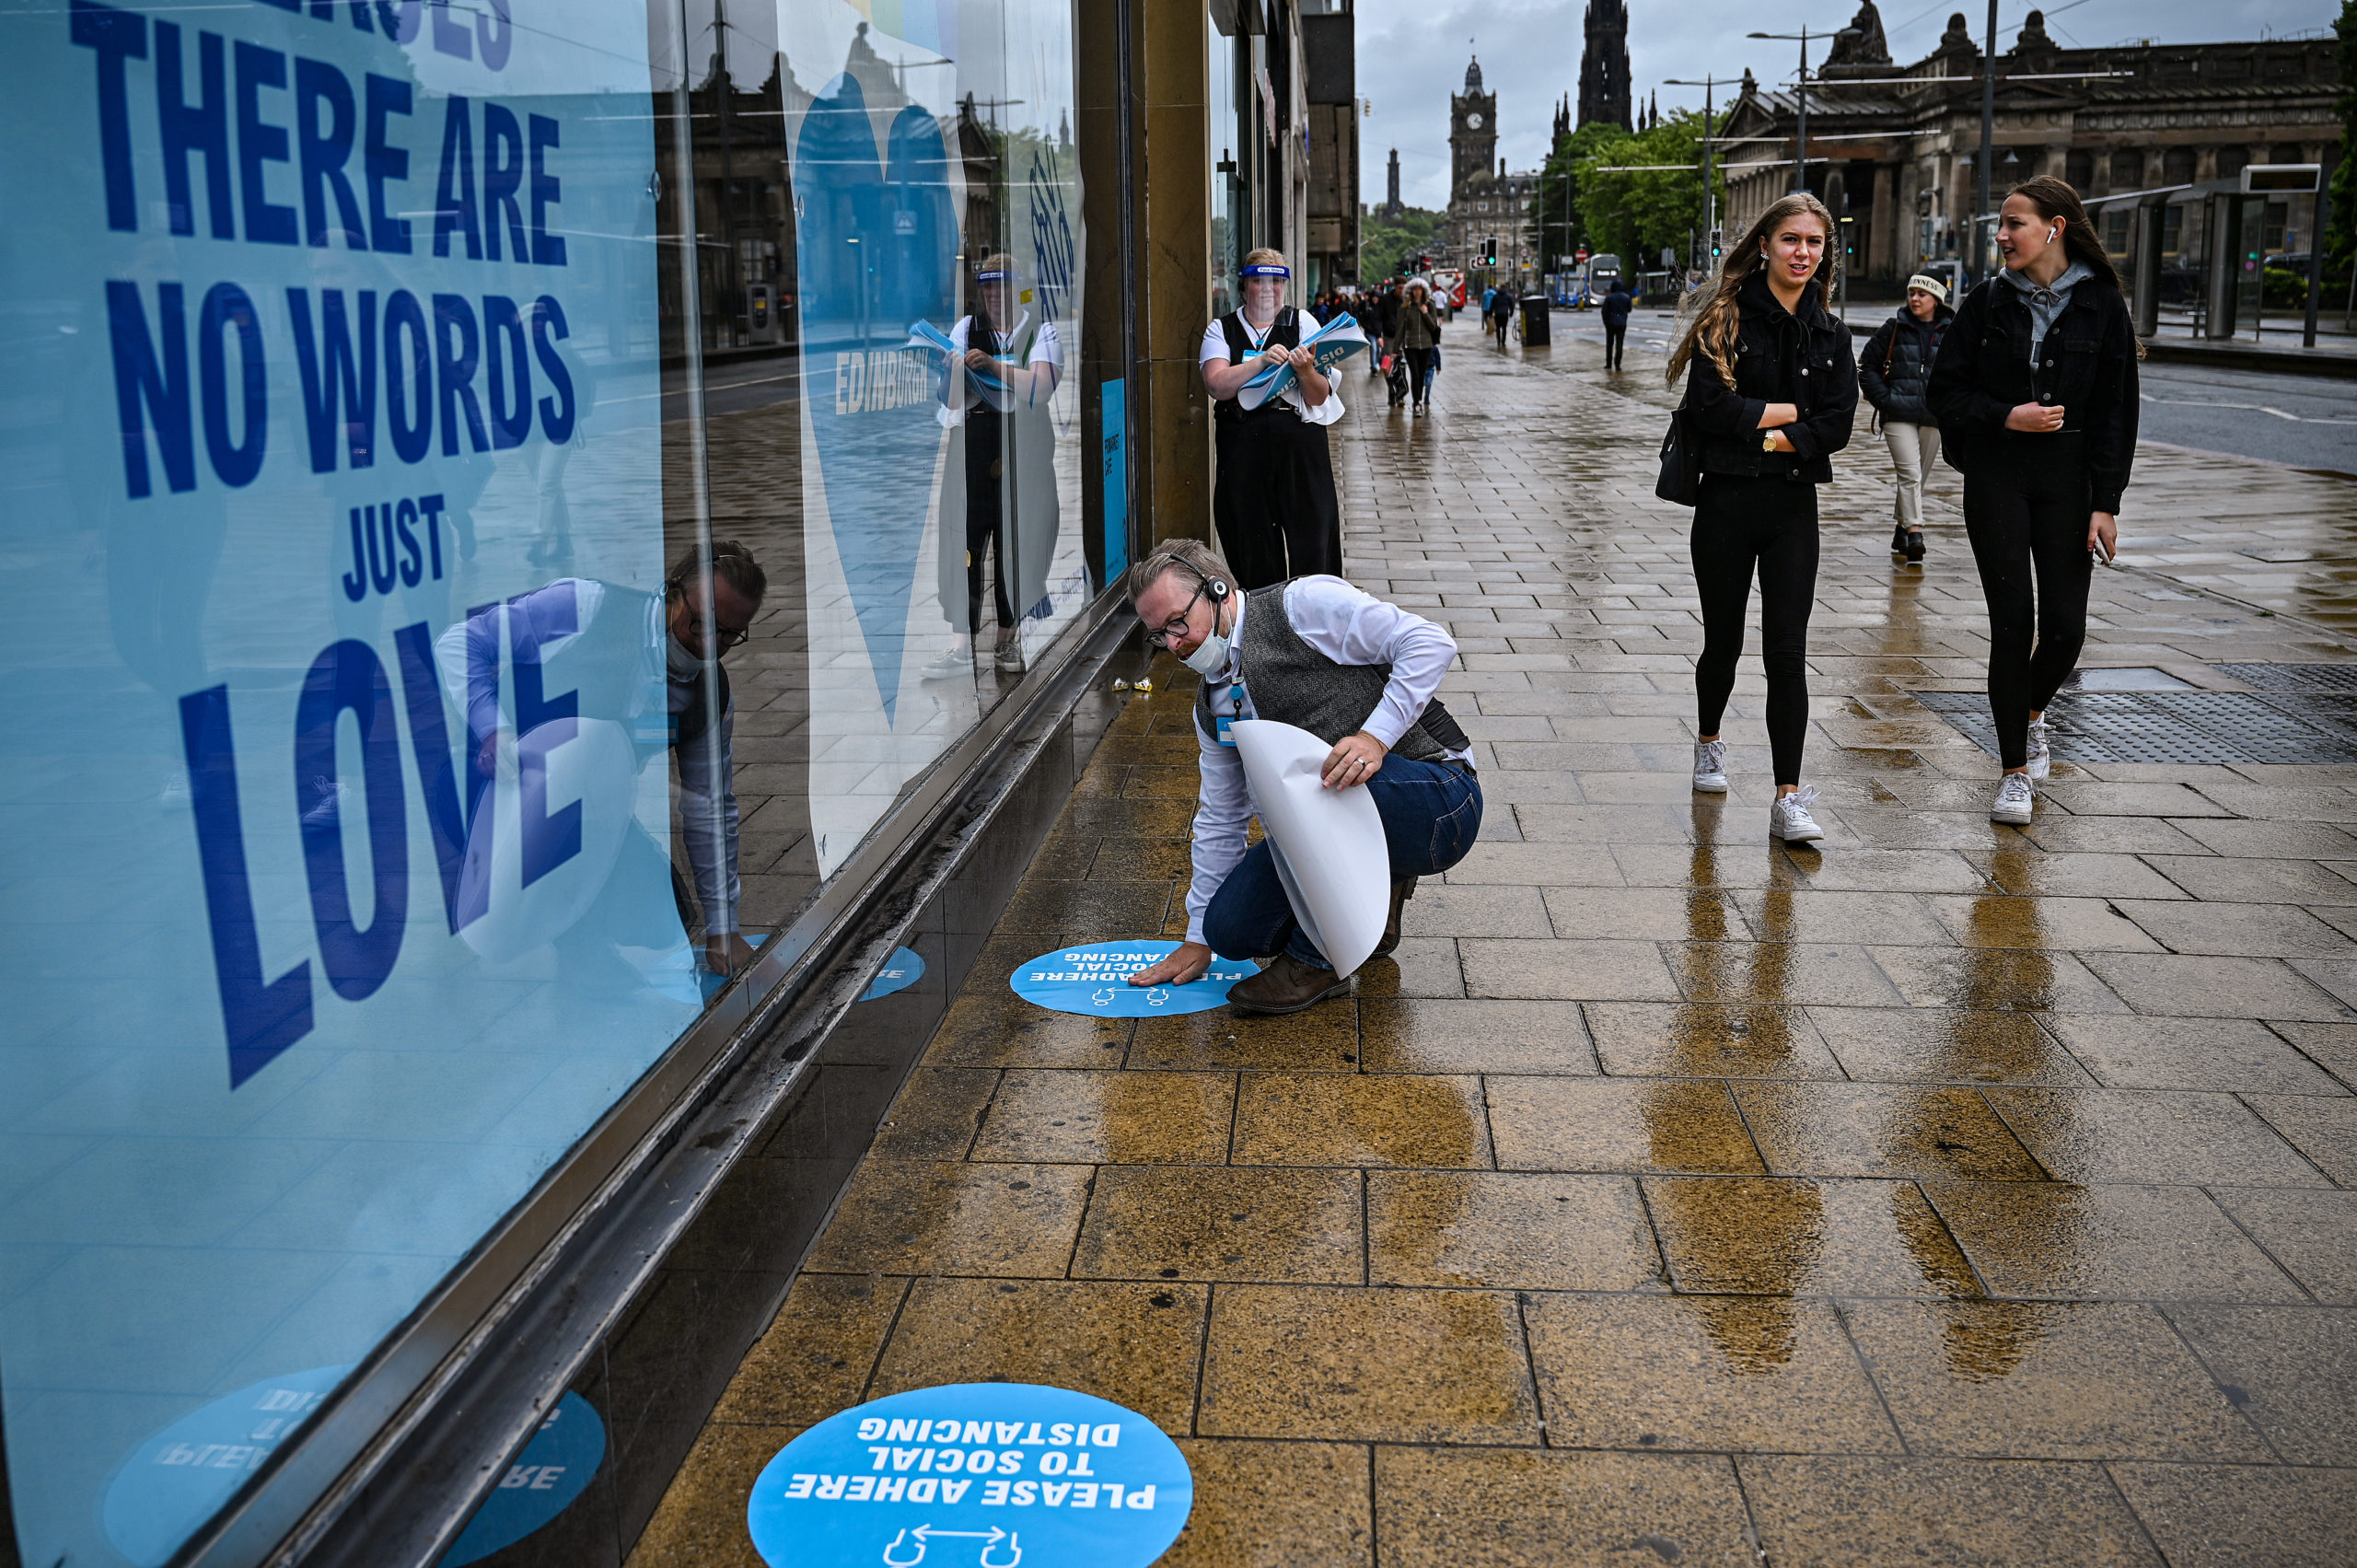 Staff apply social distancing signs to the ground while shoppers walk along Princes Street in Edinburgh.